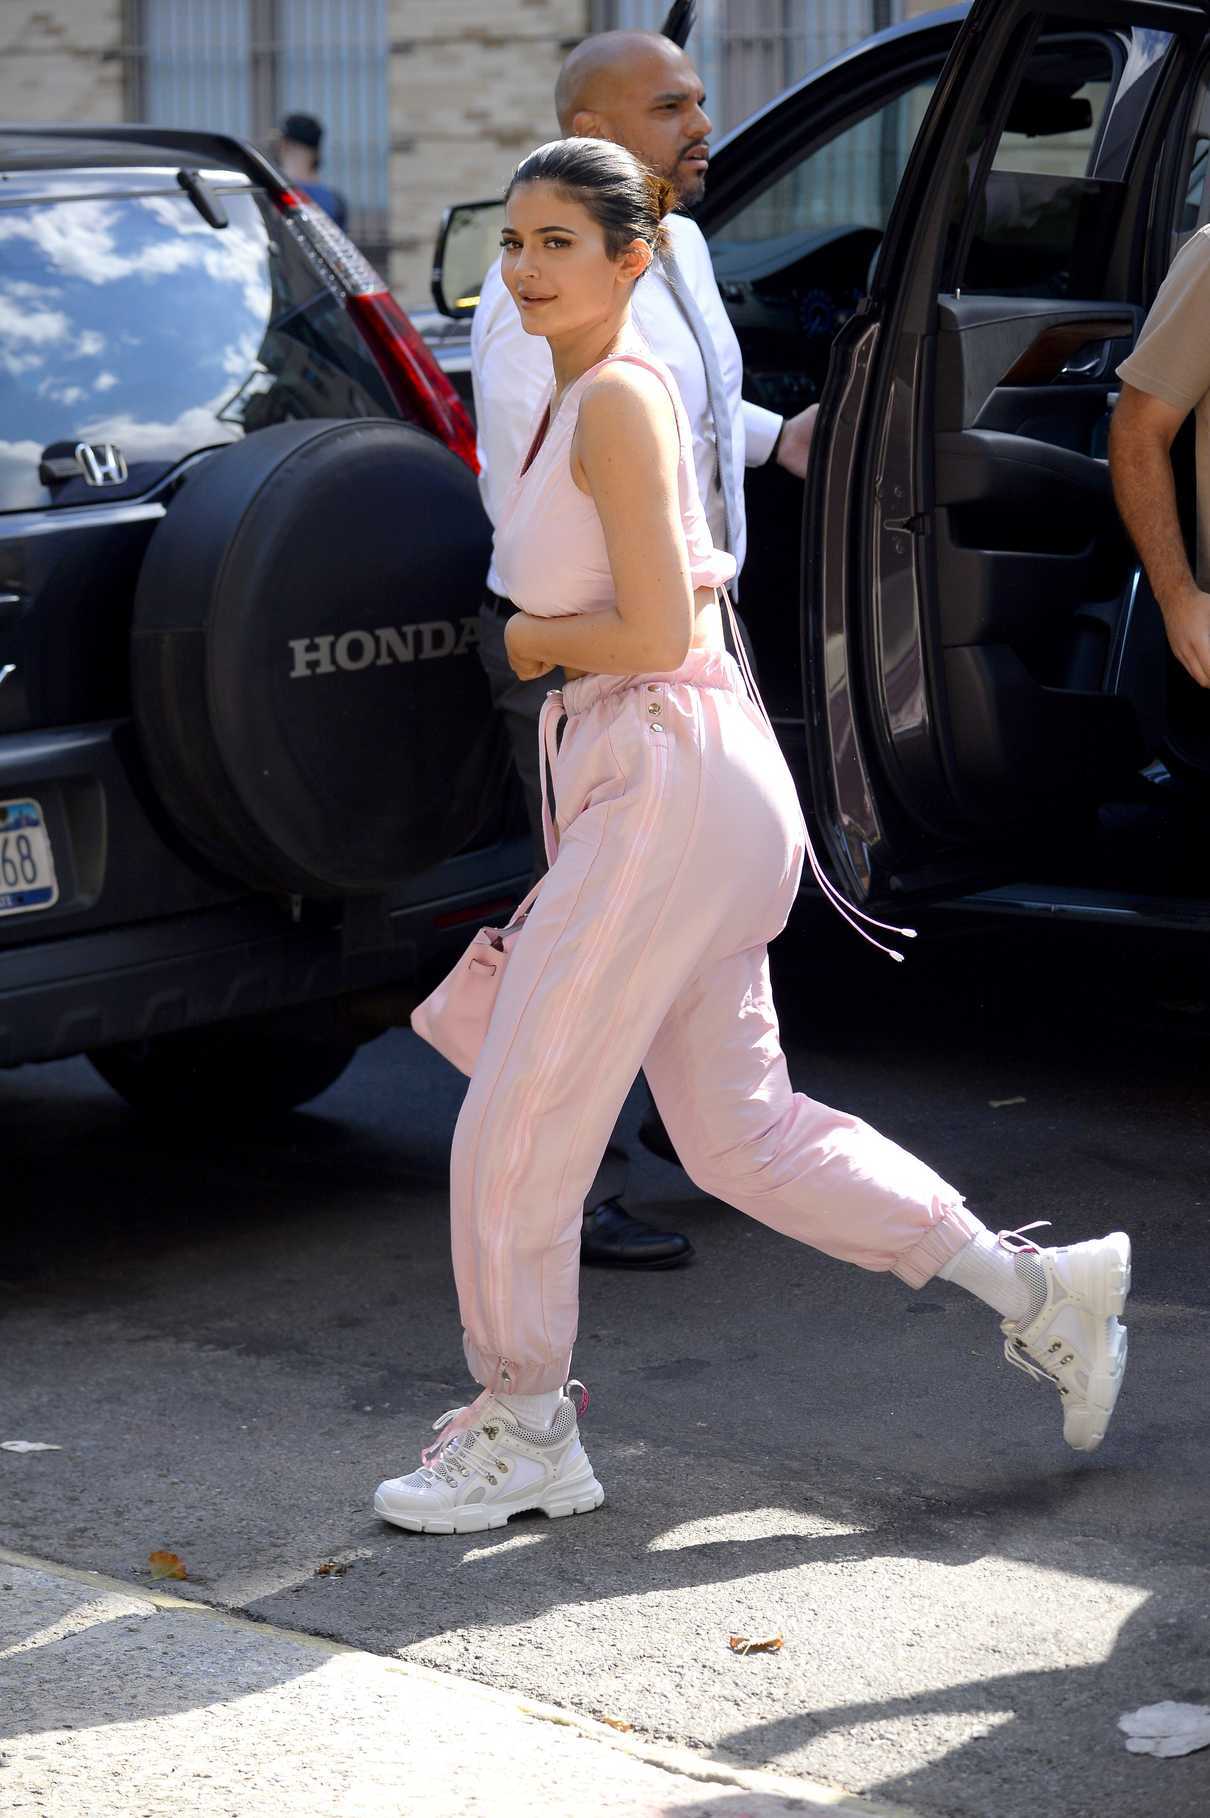 Kylie Jenner Wears a Pink Sports Bra as She Goes Shopping at the Chrome Hearts Store in the West Village in New York City 07/18/2018-2